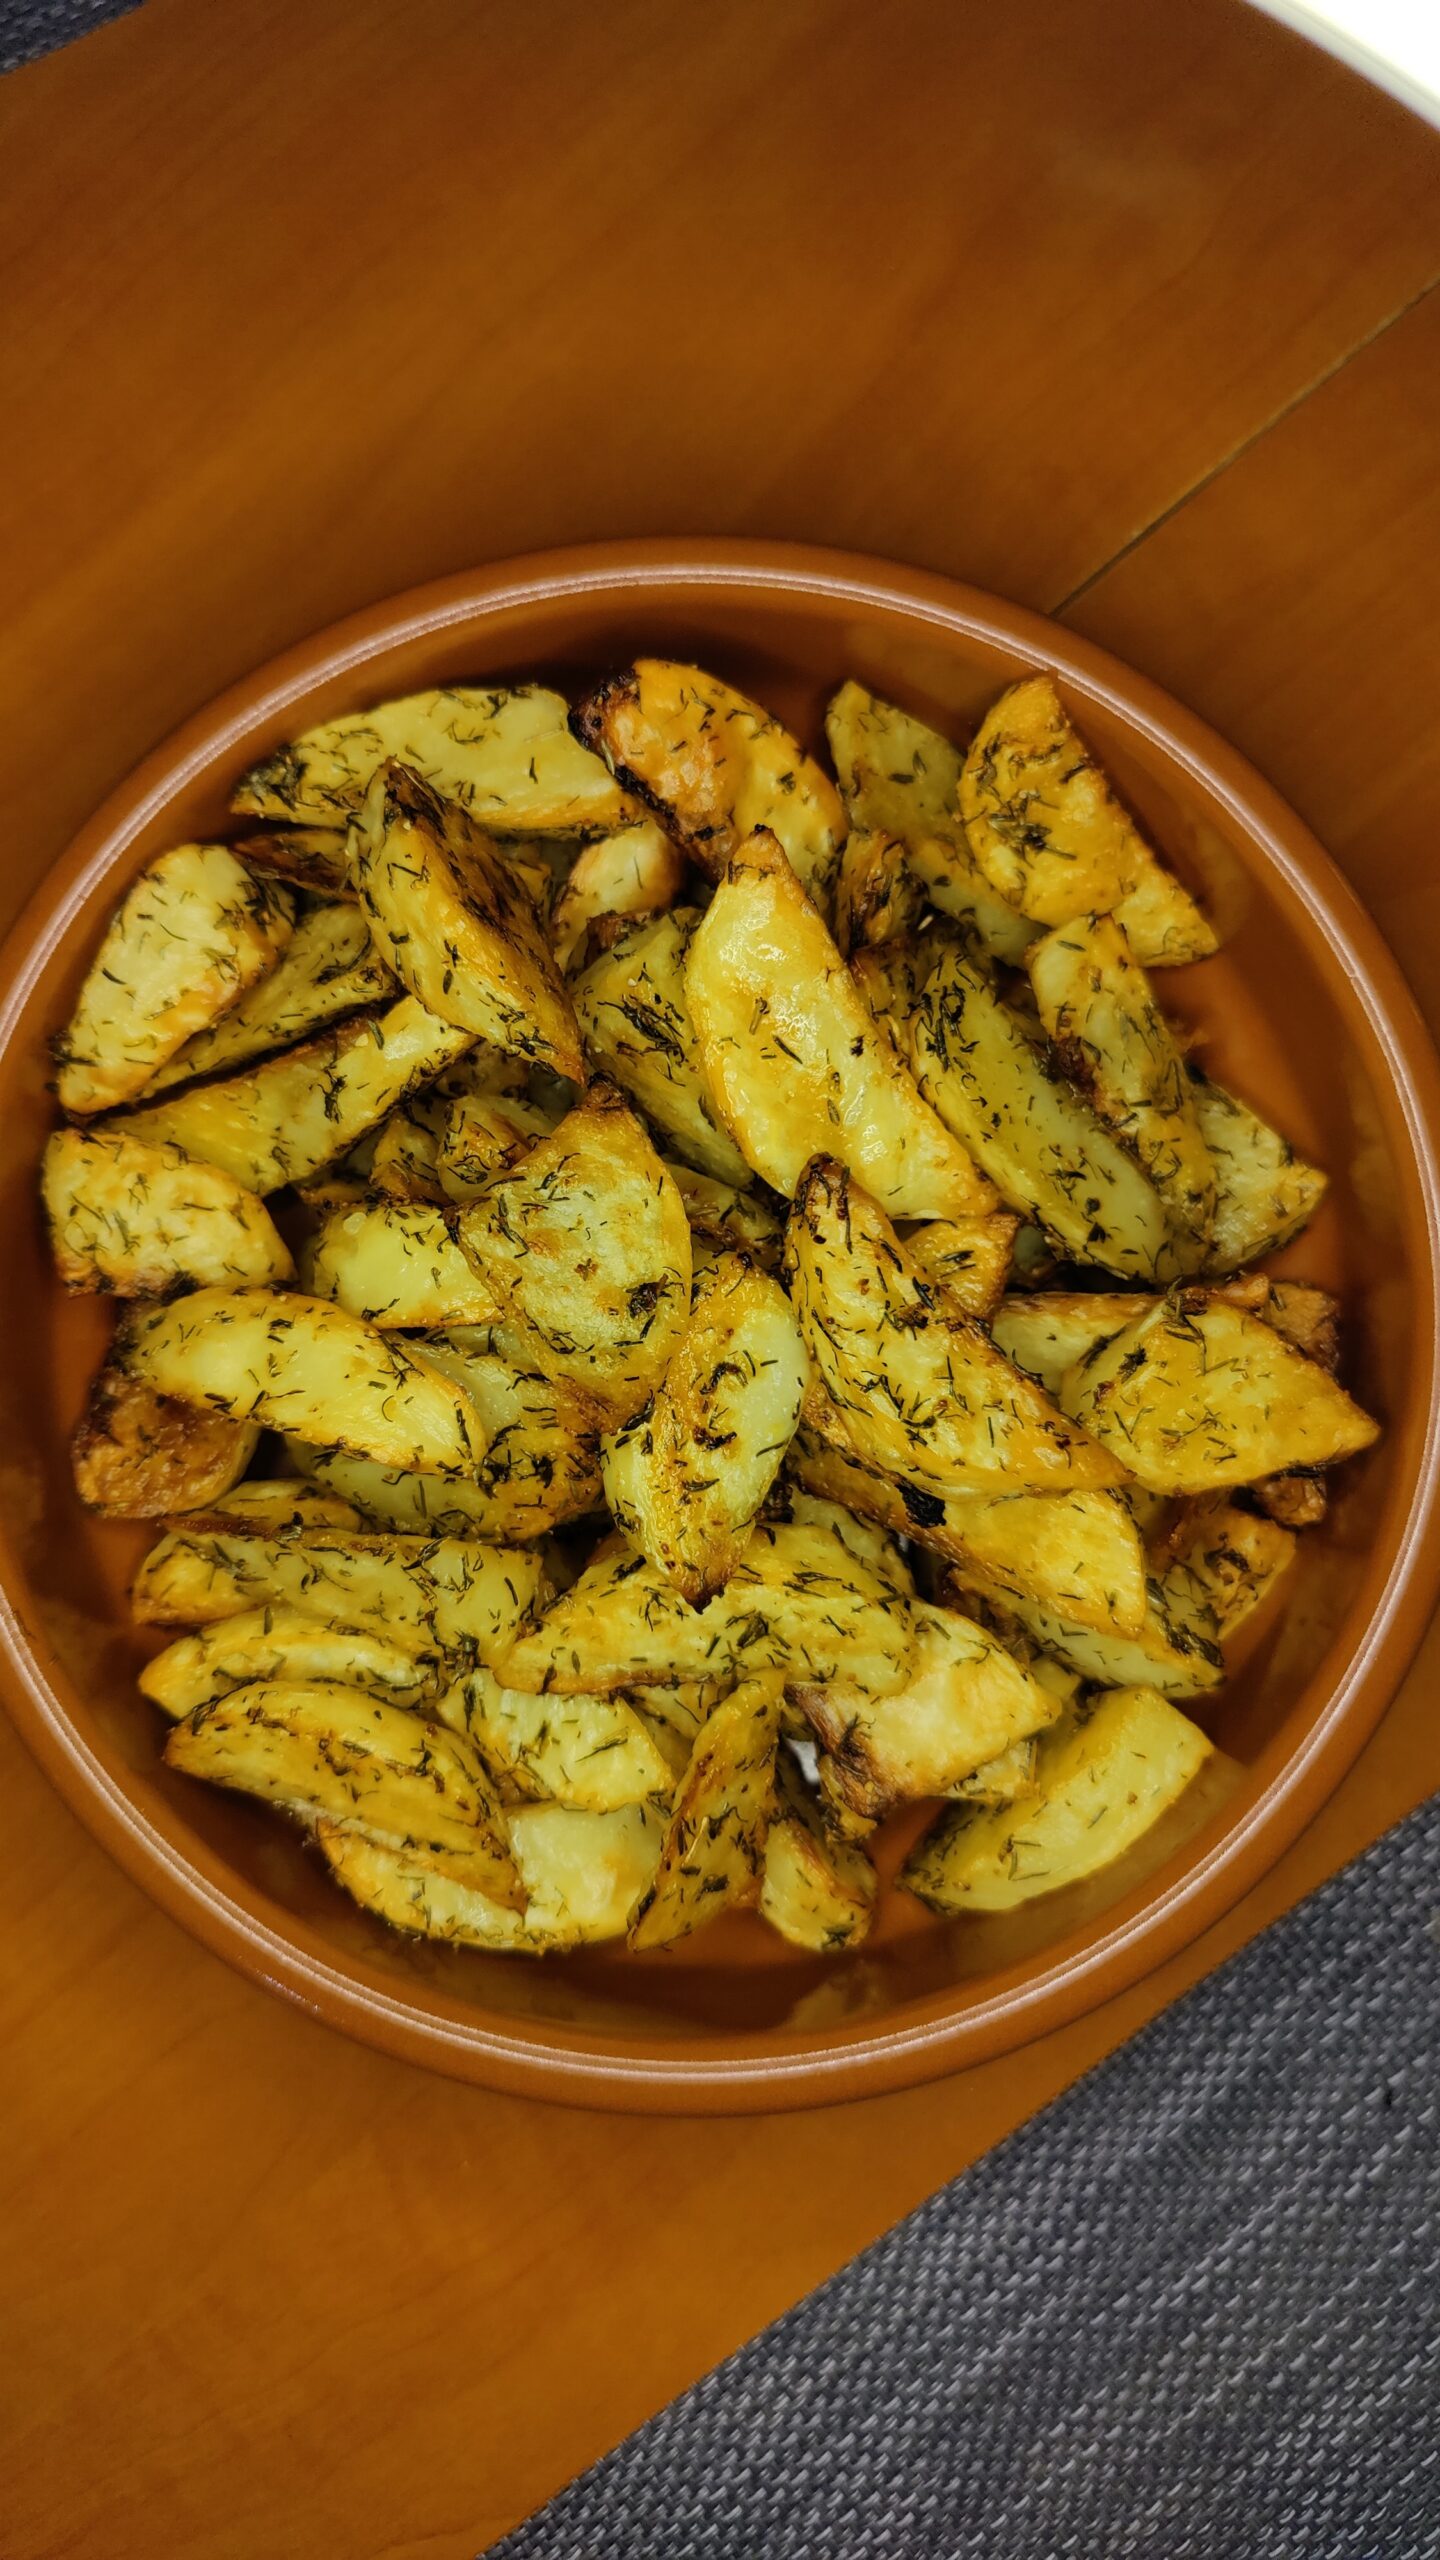 How to Make Crispy Oven-Roasted Dill Potatoes at Home?